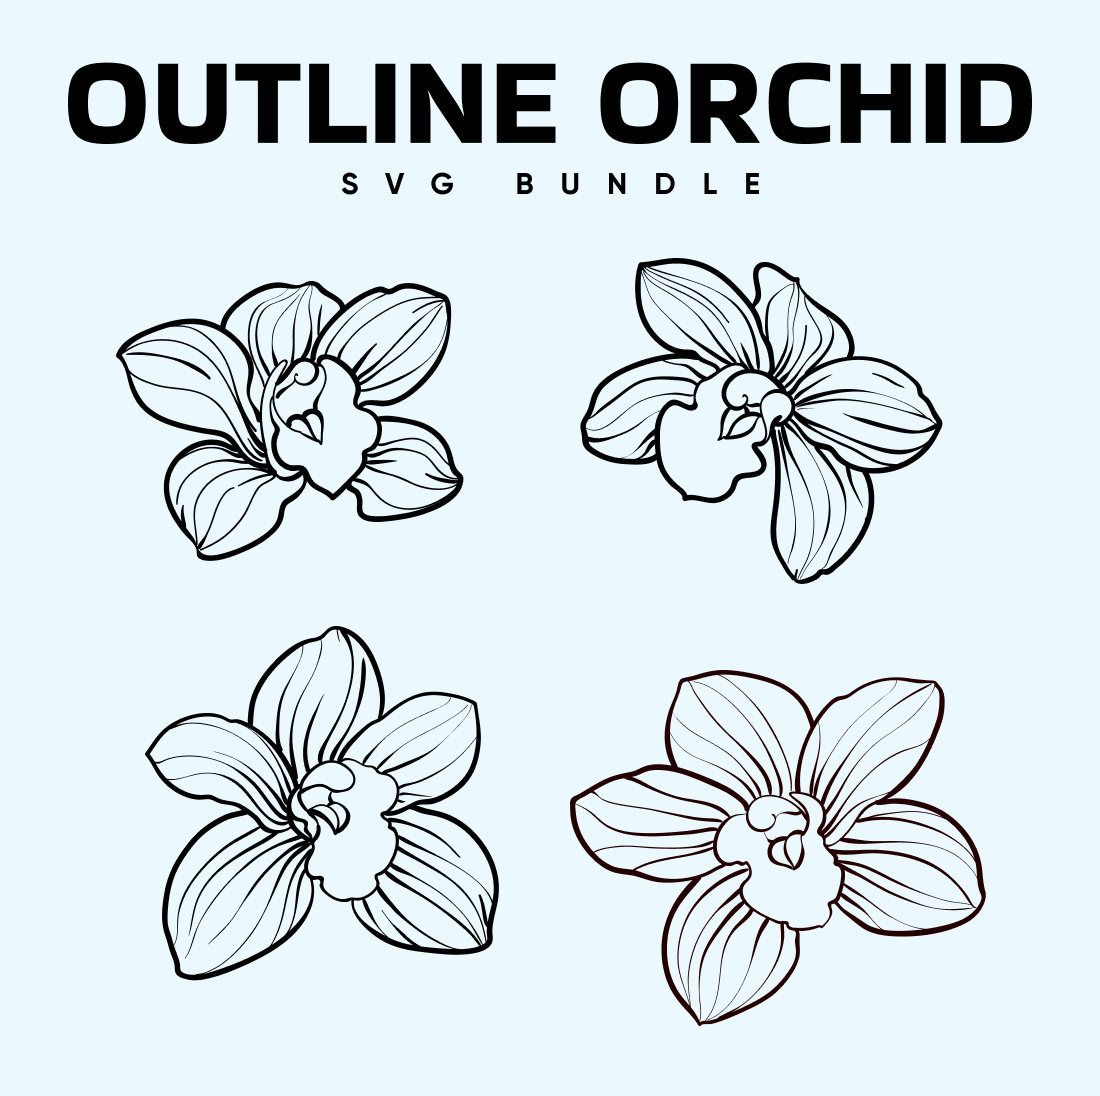 Images with outline orchid bundle.